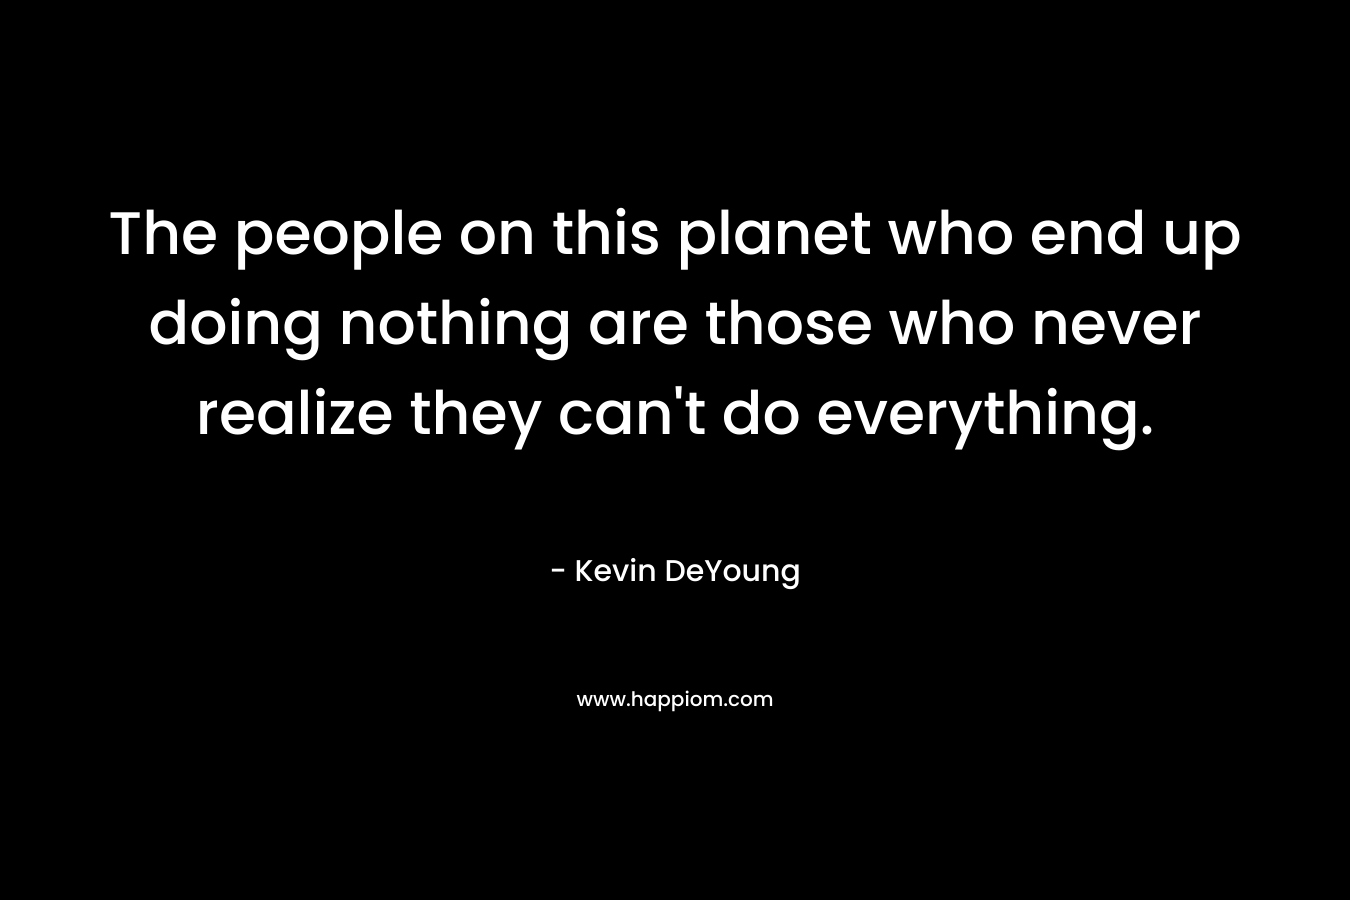 The people on this planet who end up doing nothing are those who never realize they can't do everything.